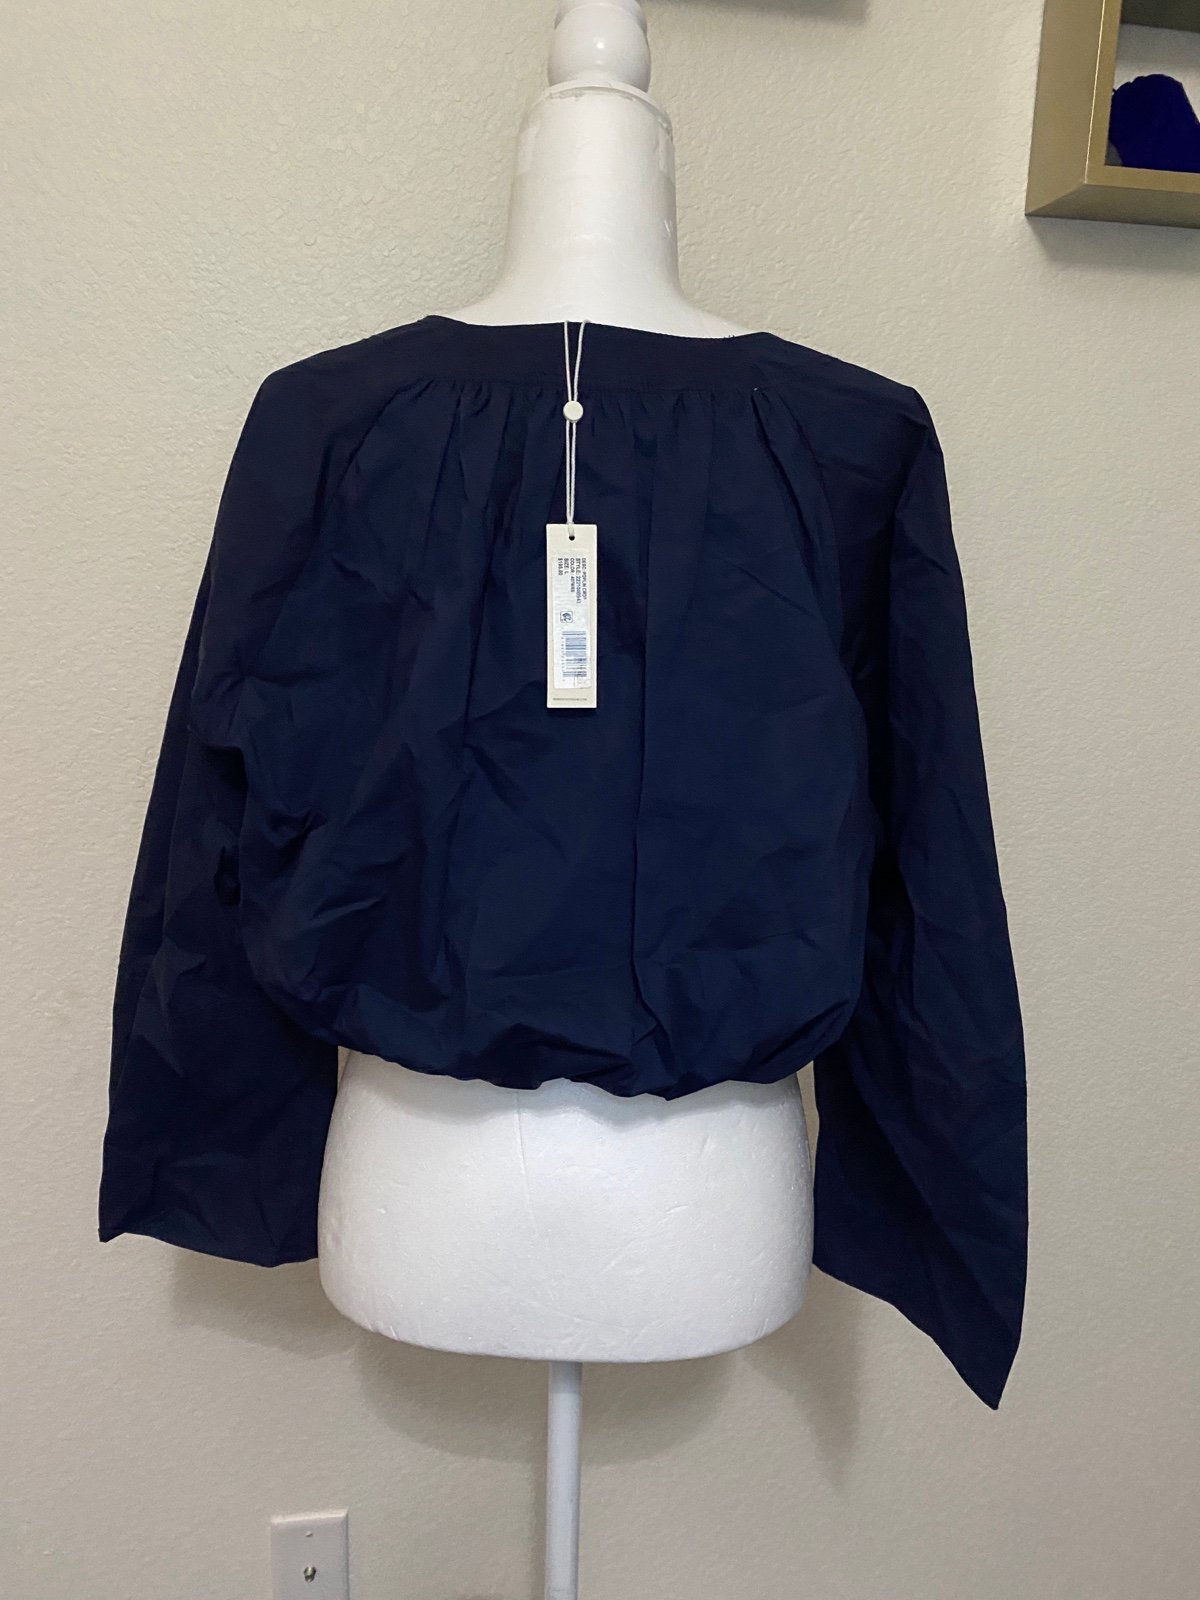 Affordable Rebecca Taylor Navy Blue Poplin Crop Wide Arm Blouse sz Large NWT! jXQzozkMb Counter Genuine 